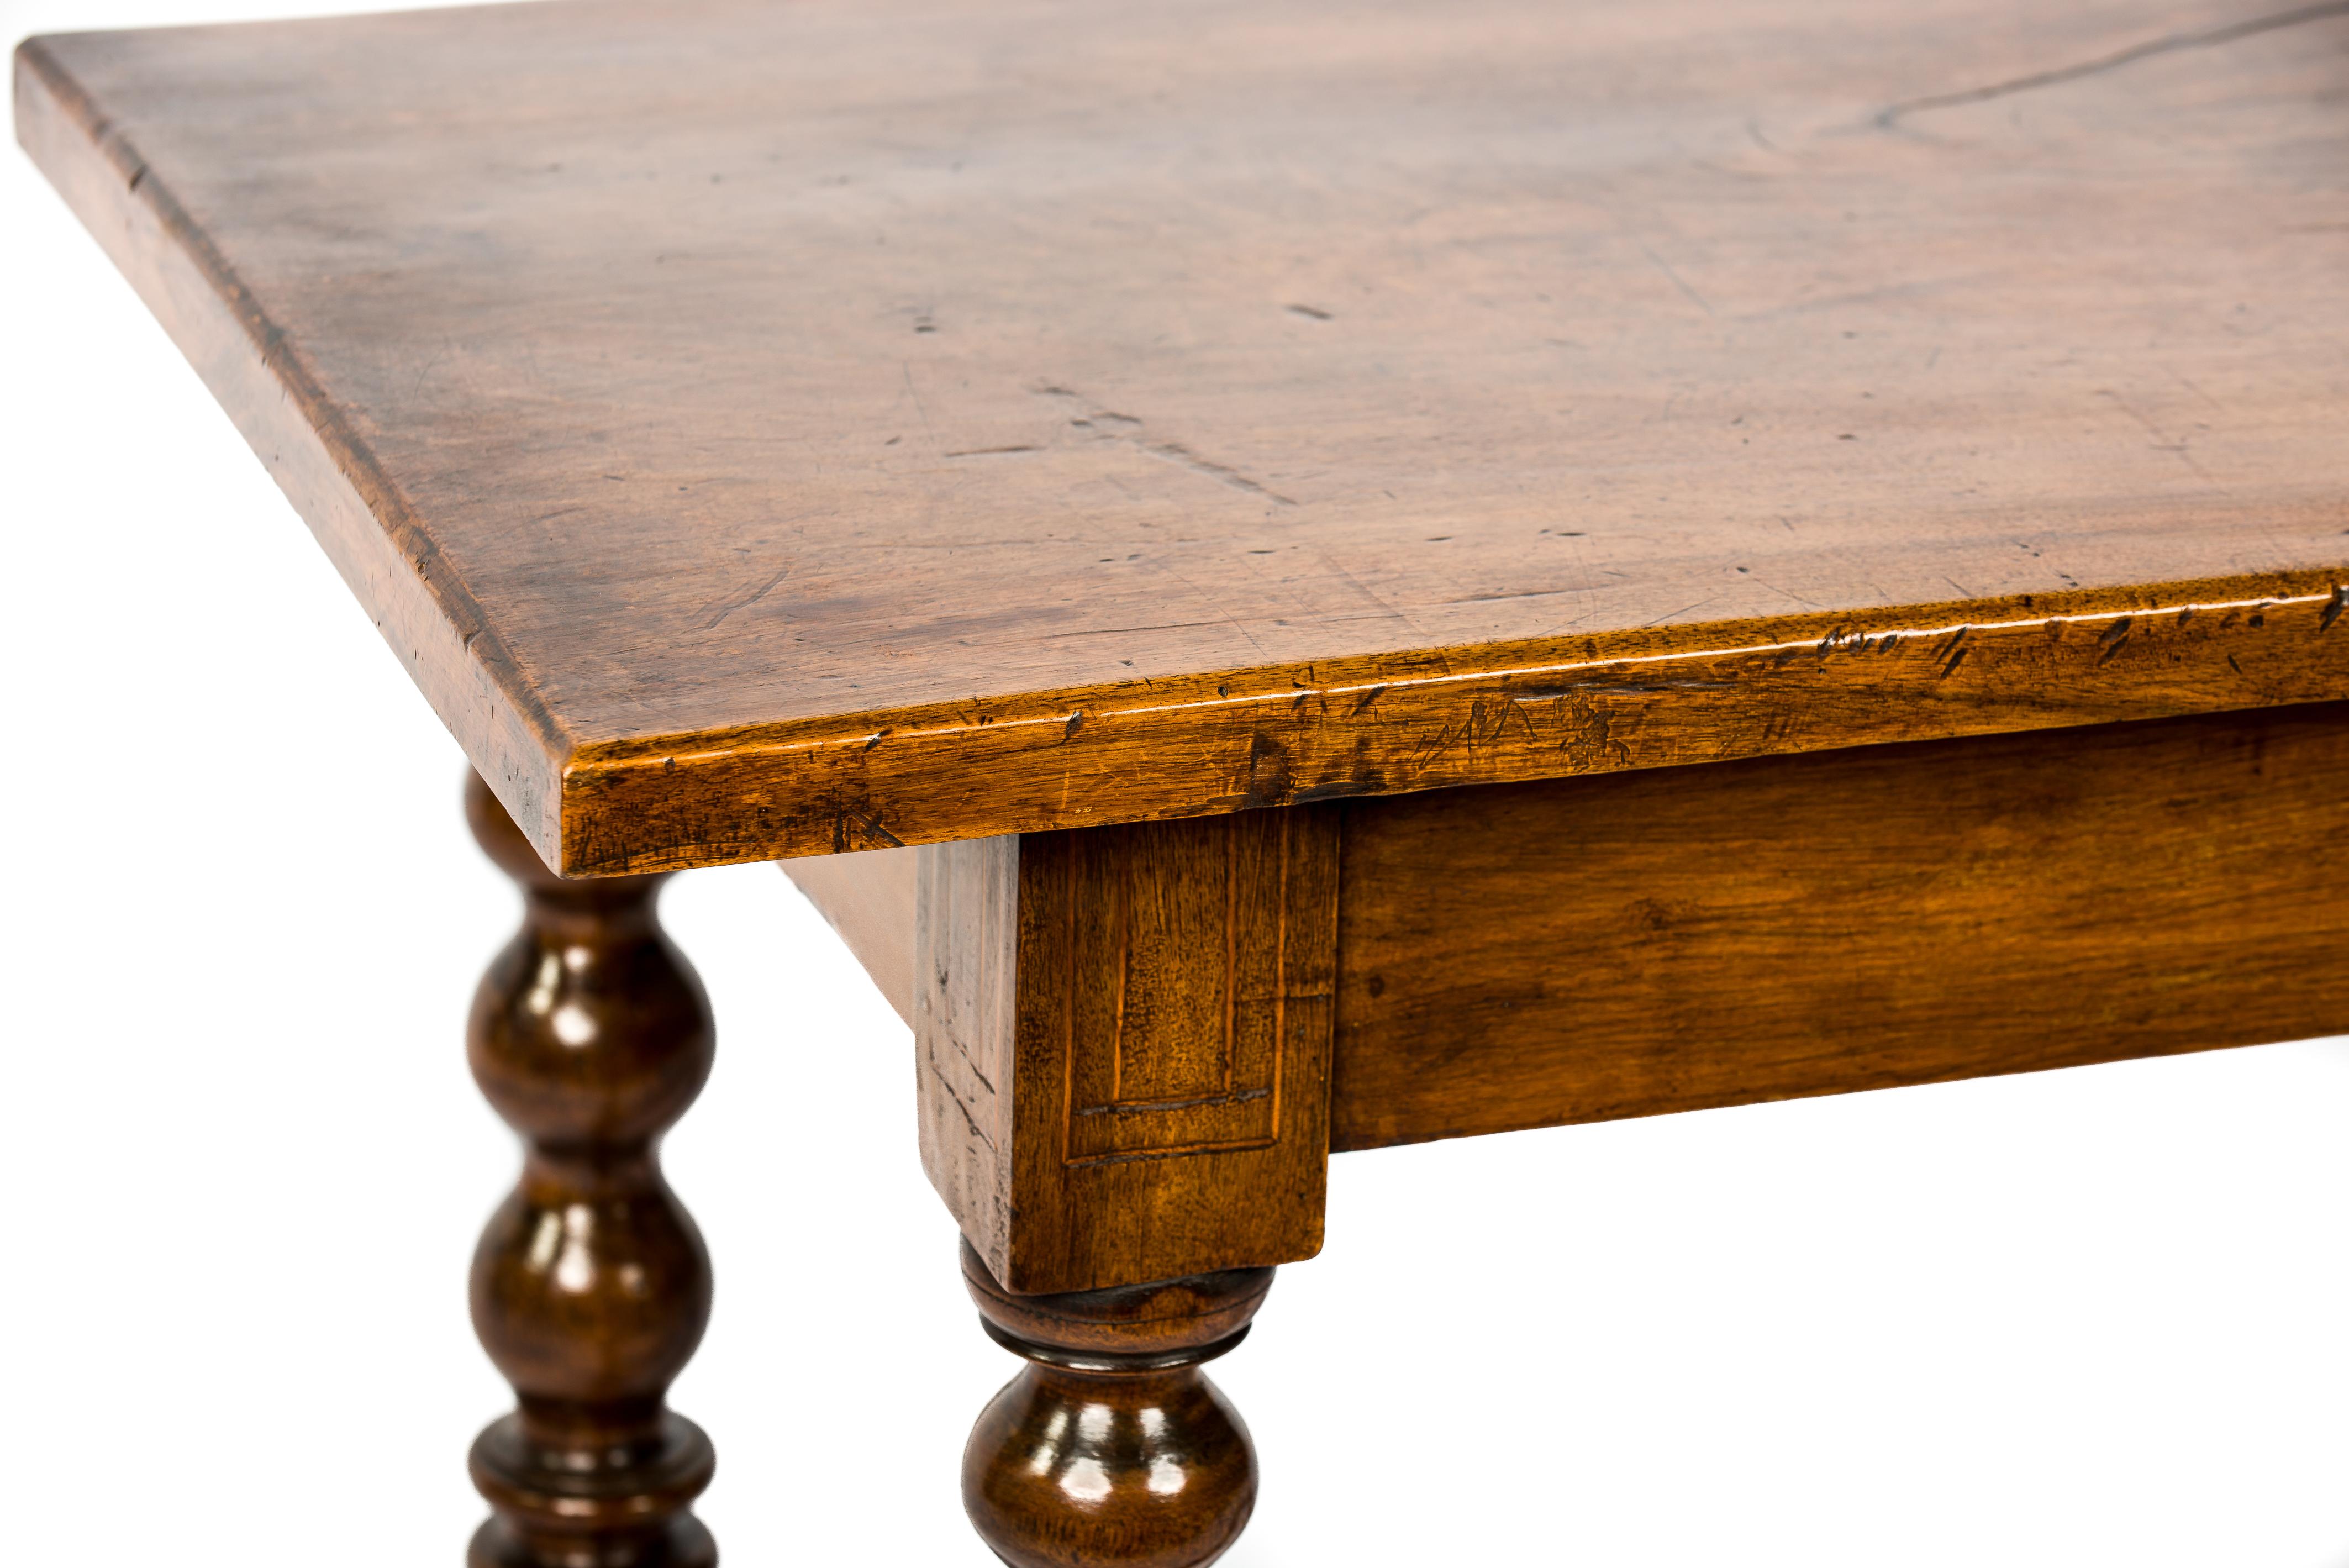 Baroque Antique 18th Century Spanish Walnut Wall Table or Side-Table with Turned Legs For Sale